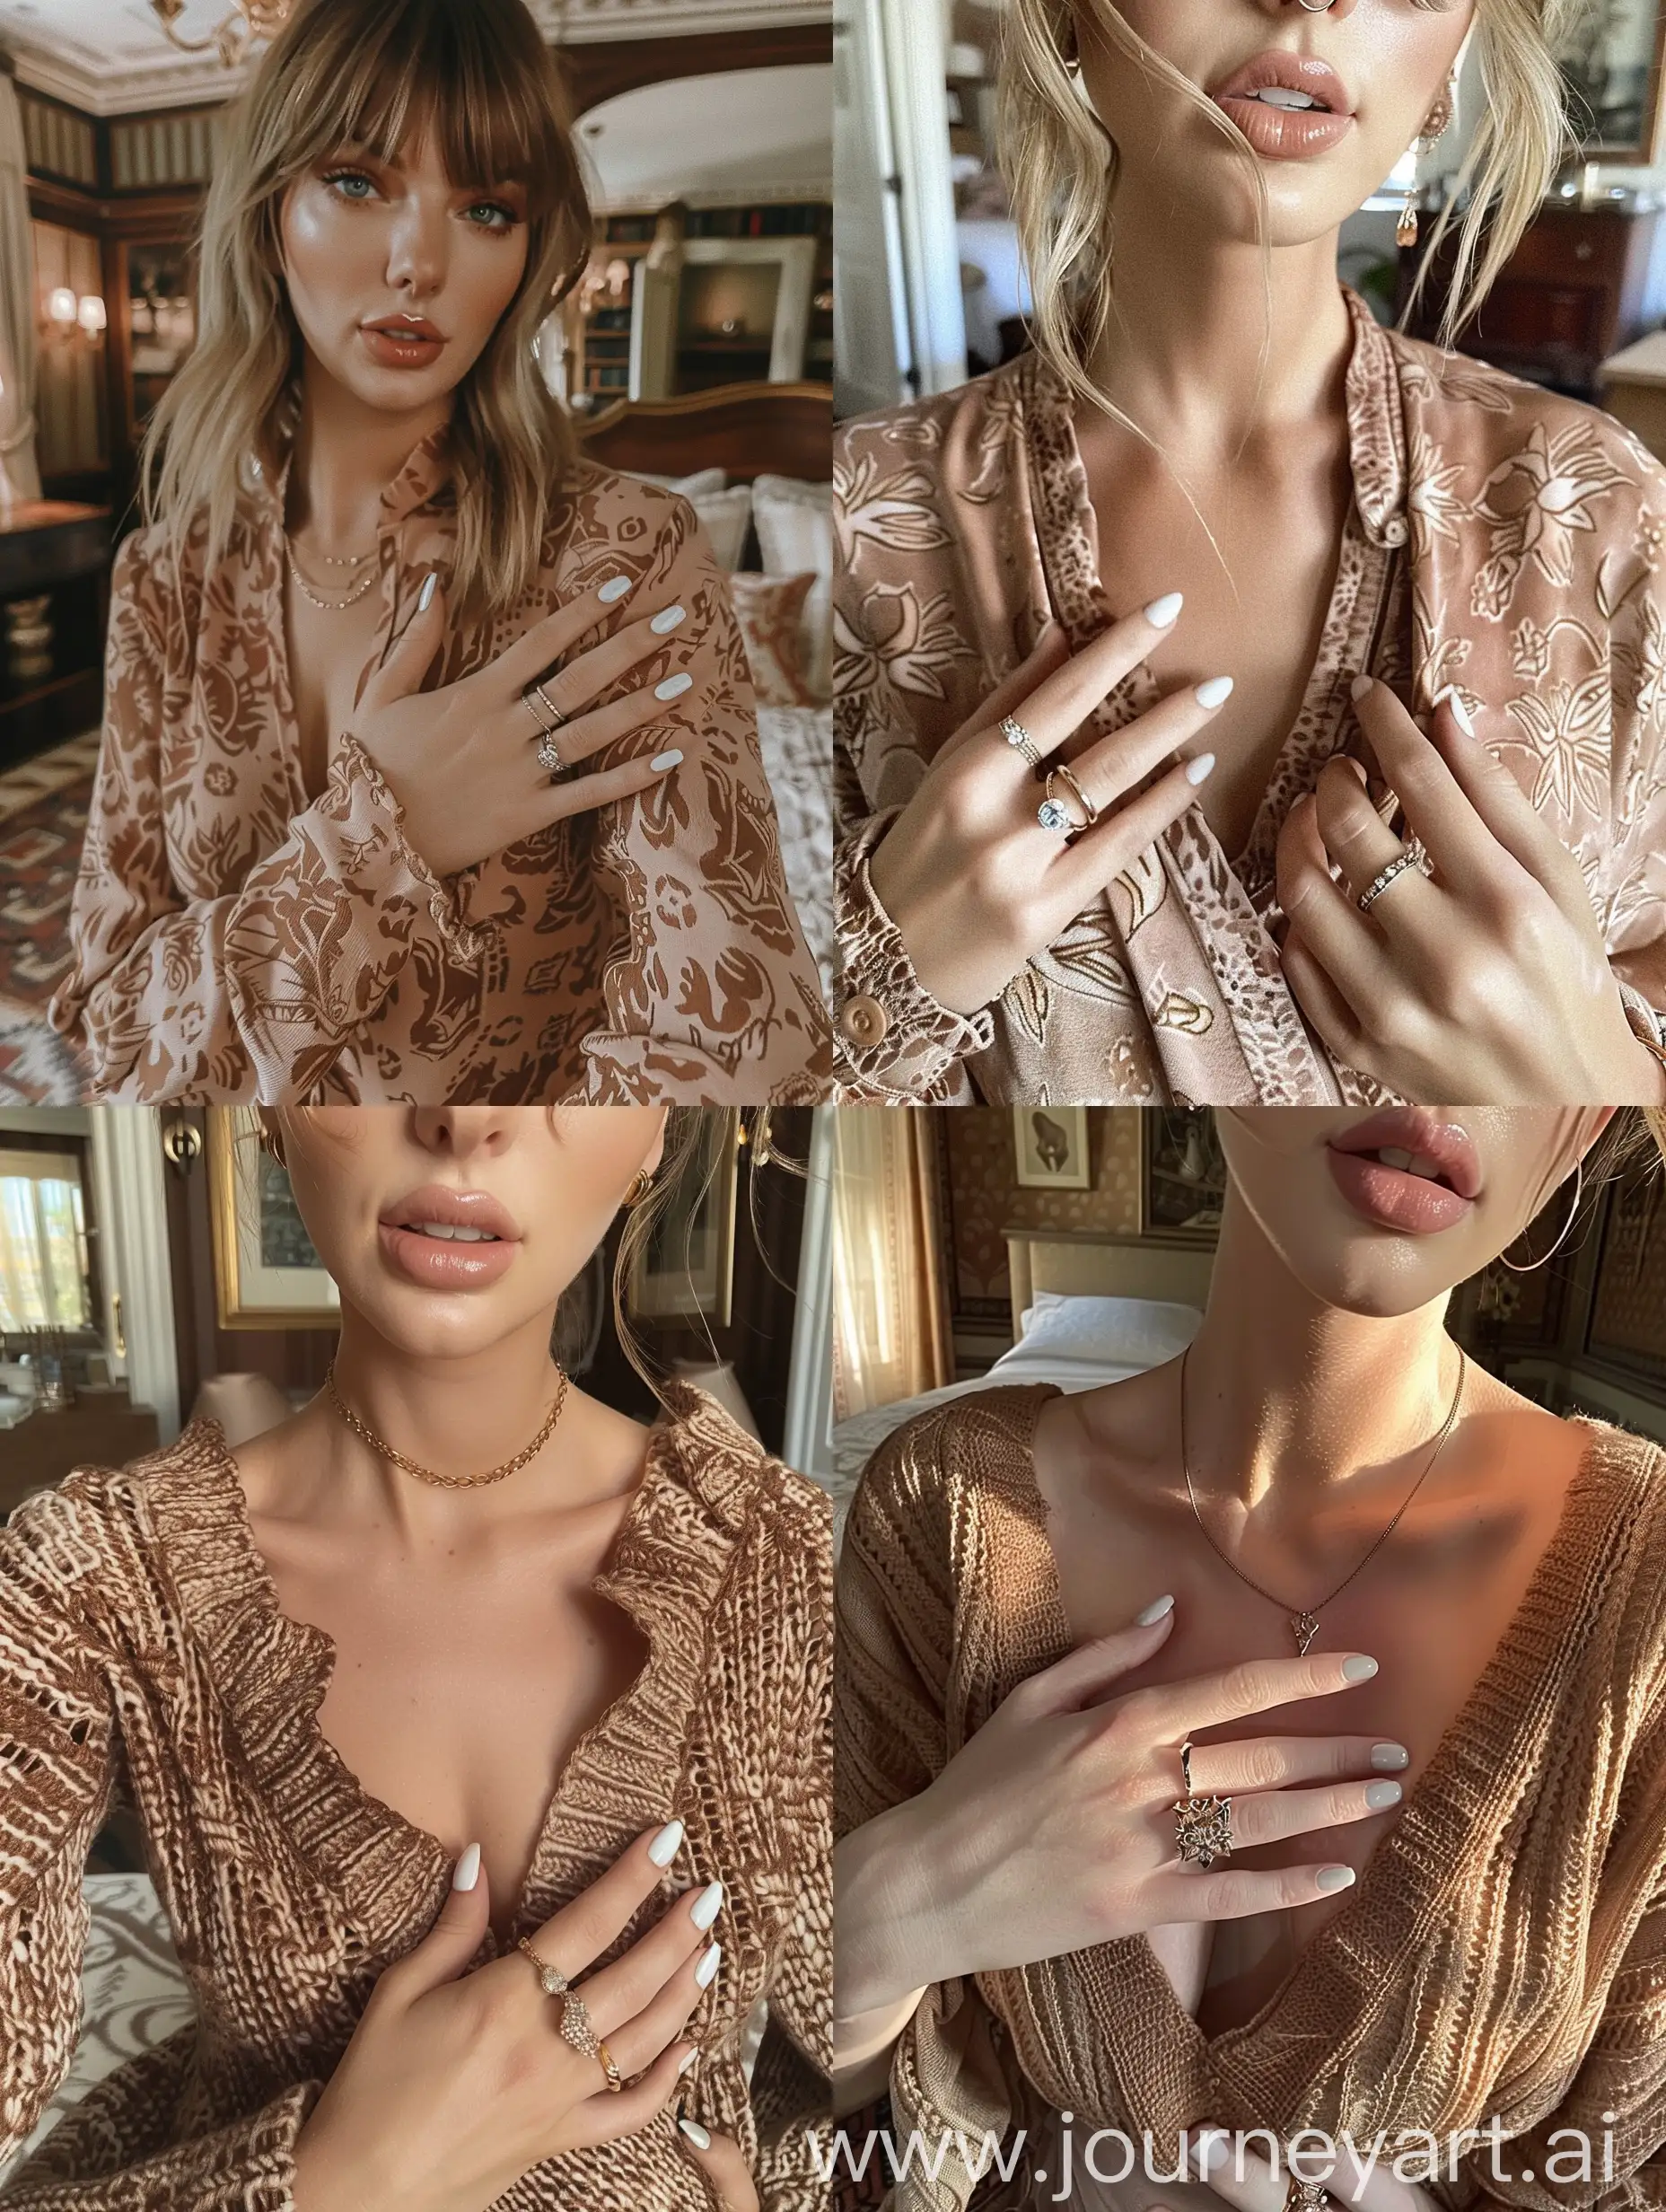 Aesthetic Instagram selfie of Taylor Swift wearing comfortable clothes, warm brown tones, in a fancy New York apartment, close up selfie, manicured, white gel nail polish, one hand holding chest, rings